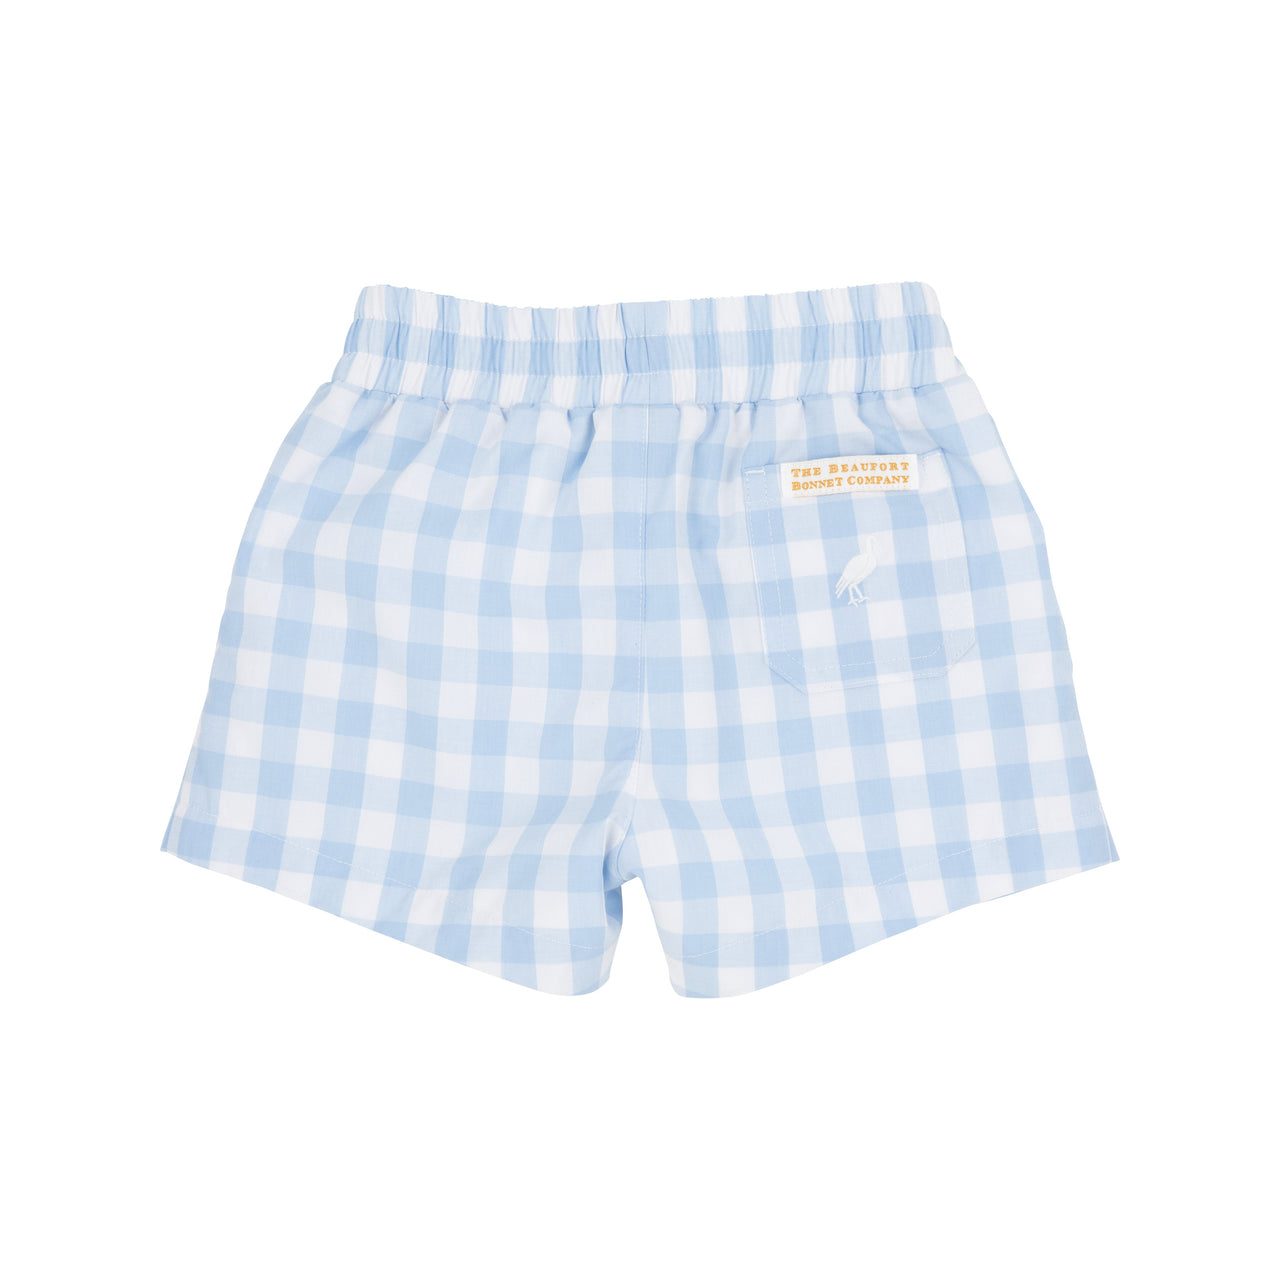 Sheffield Shorts | Beale Street Blue Check with Worth Avenue White